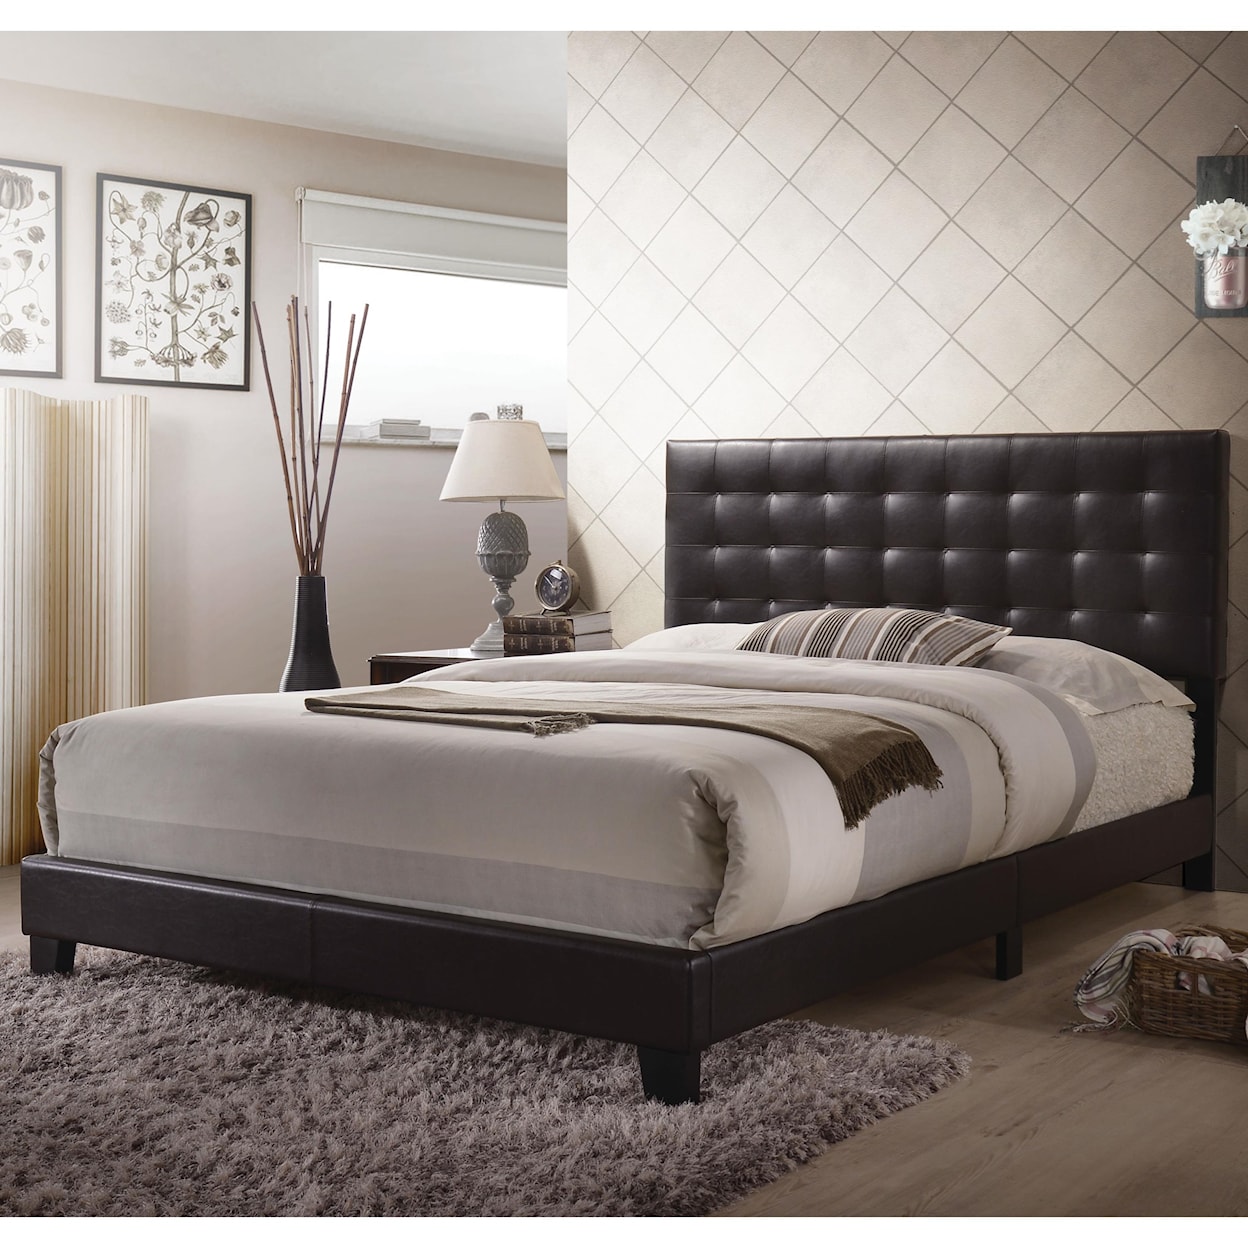 Acme Furniture Masate Queen Bed